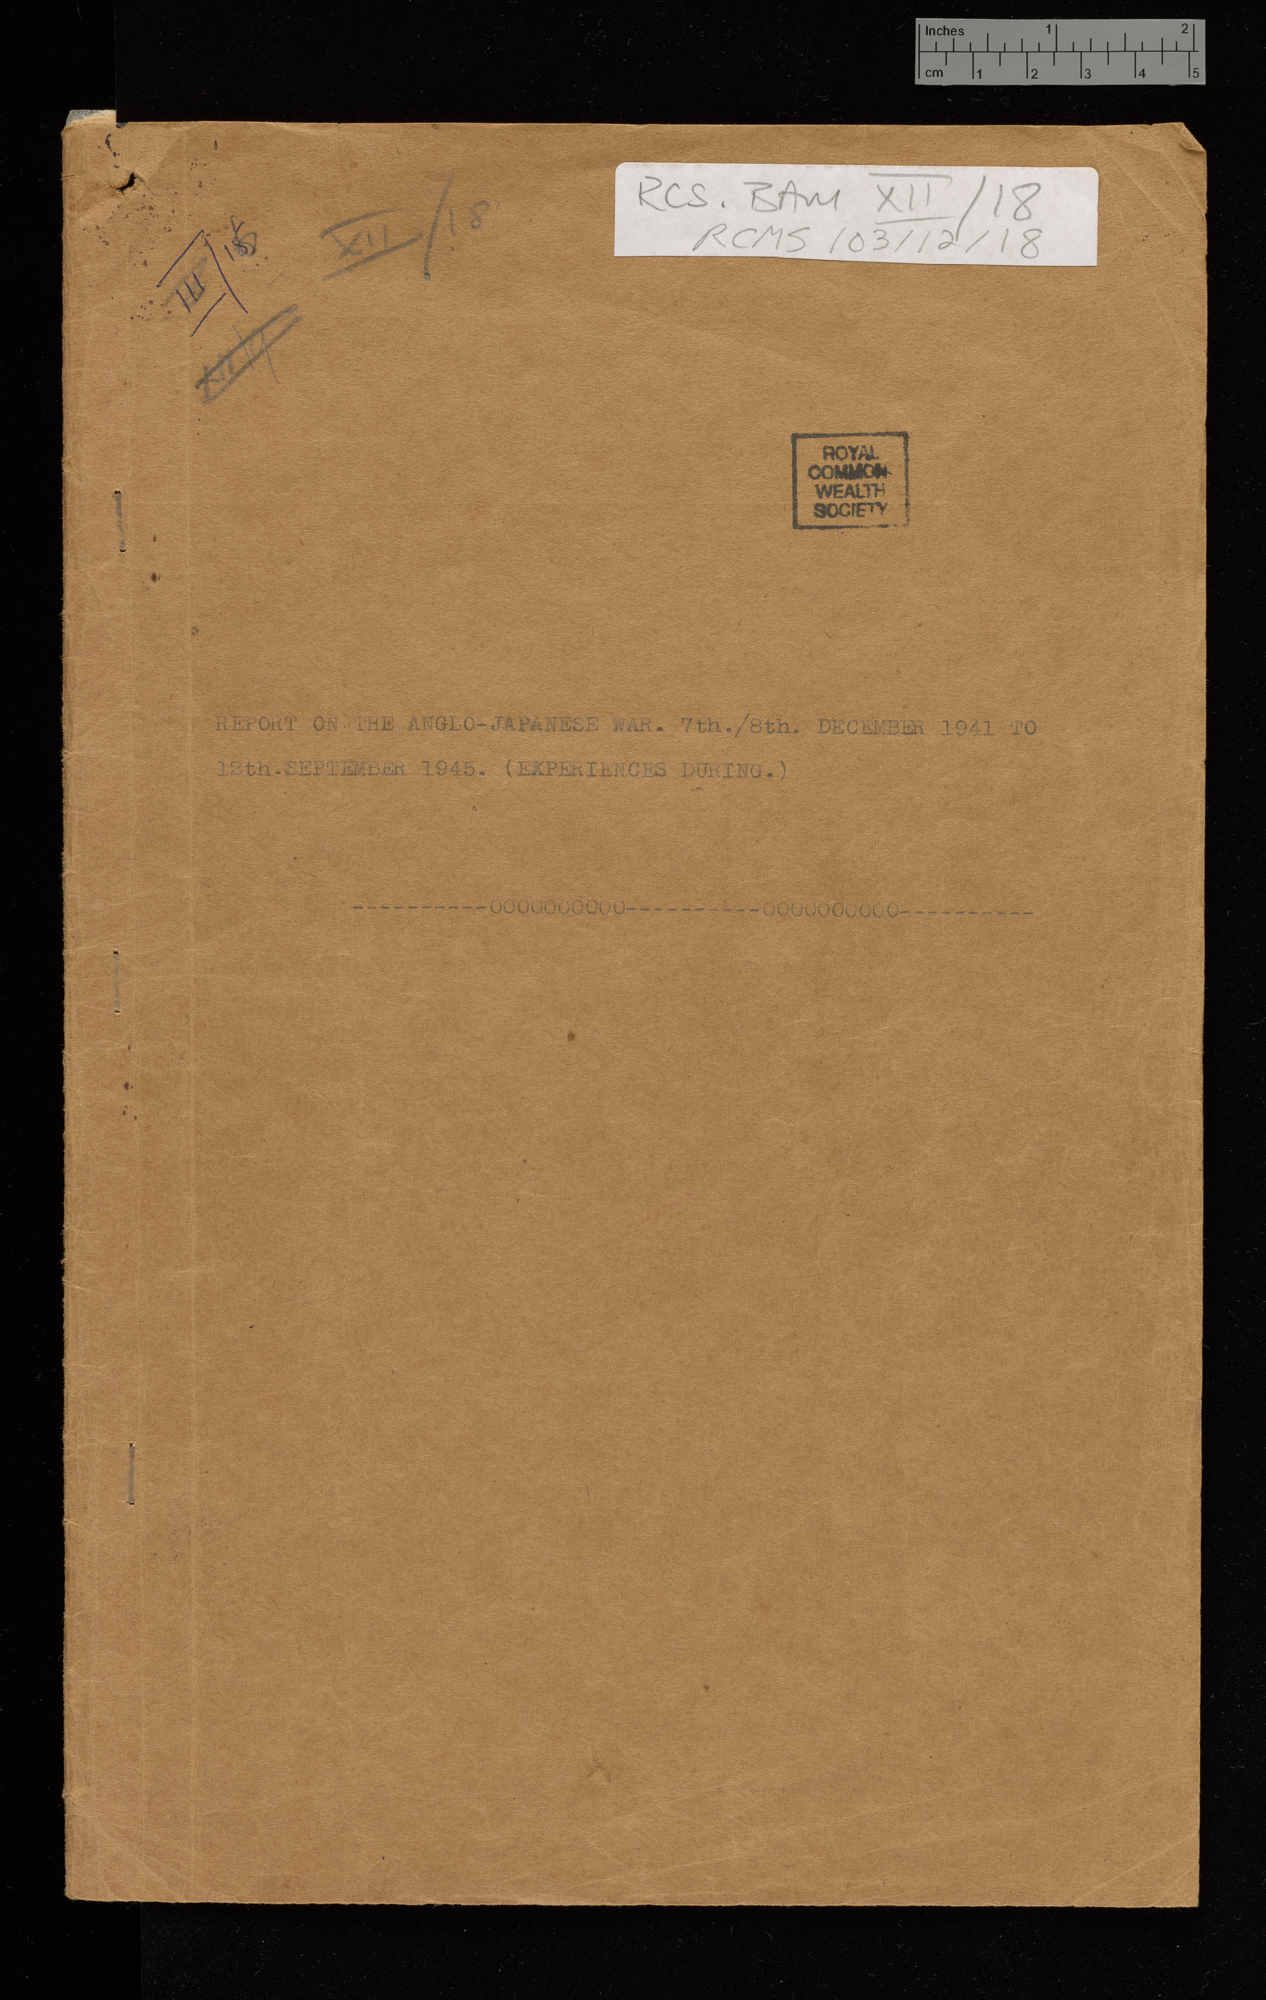 Report on the Anglo-Japanese War, 7/8 Dec. 1941 to 12 Sept. 1945